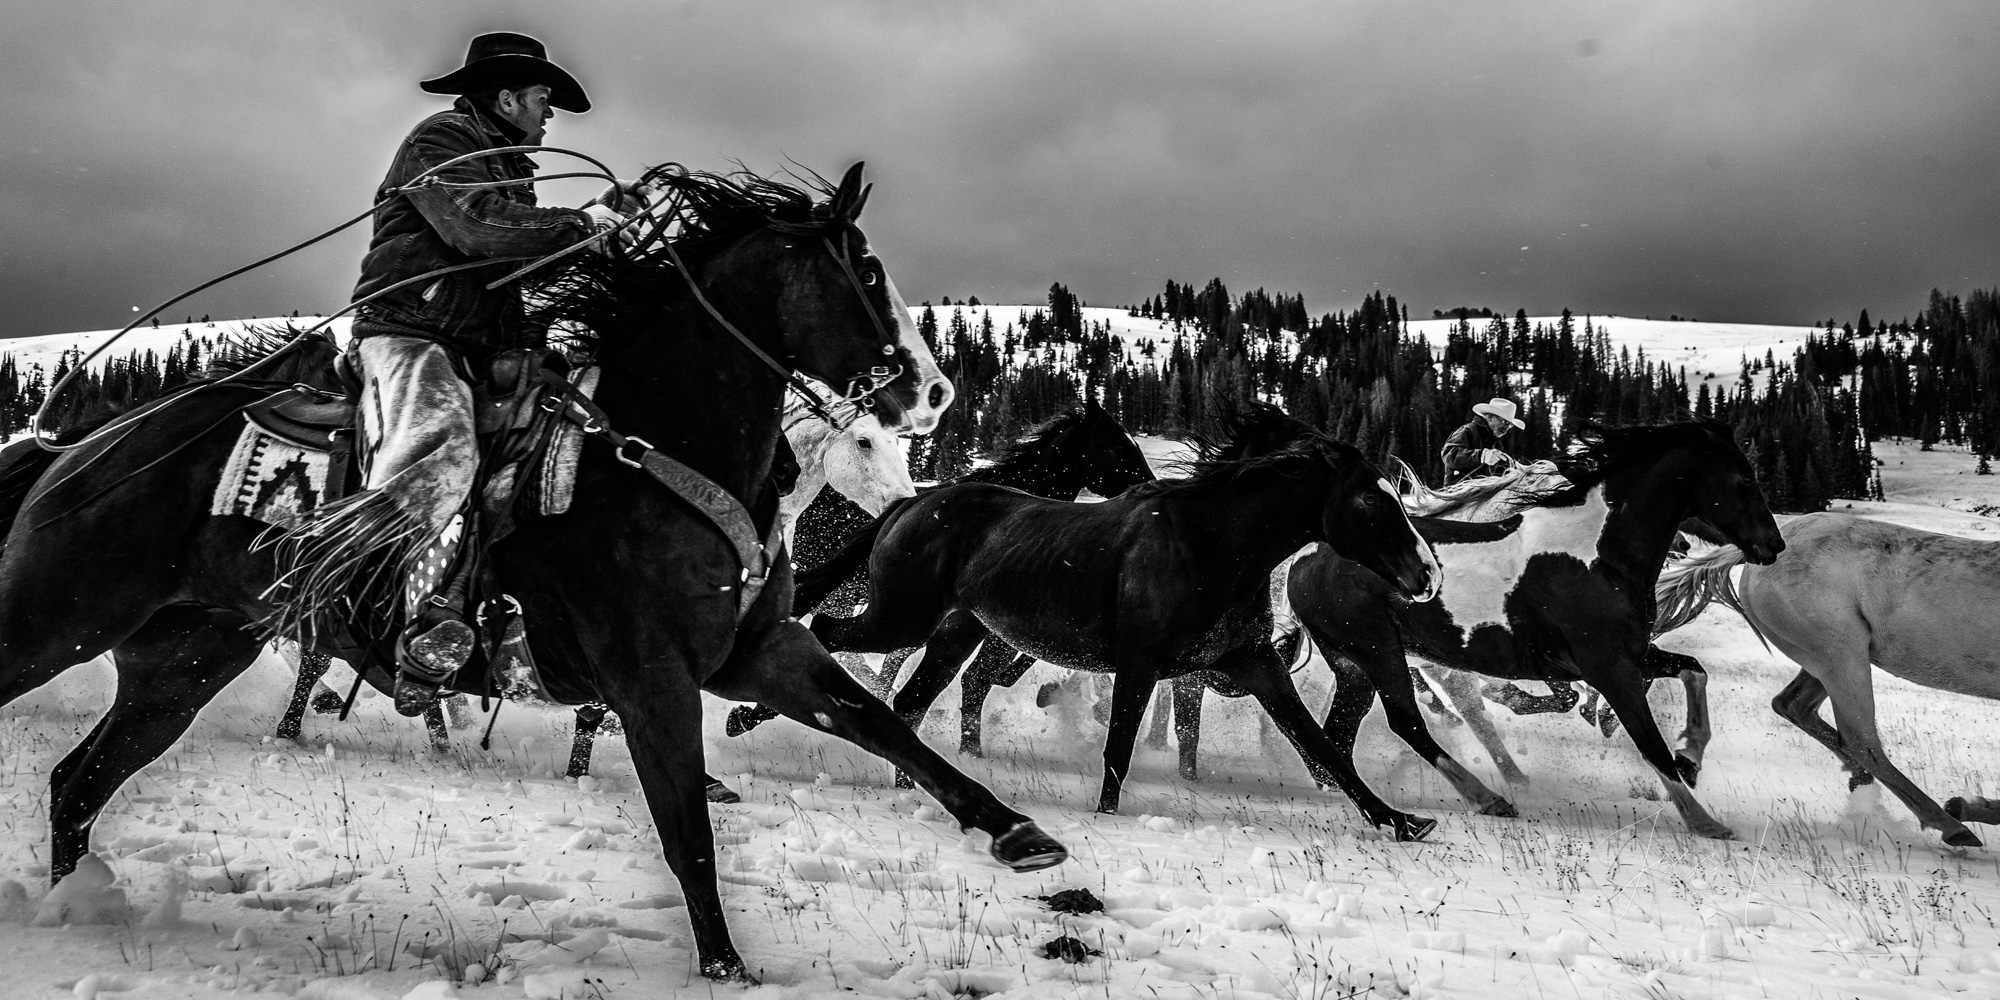 Fine Art Limited Edition Photo Prints of Cowboys, Horses, and life in the West. Winter Roundup. A Cowboy picture in black and...